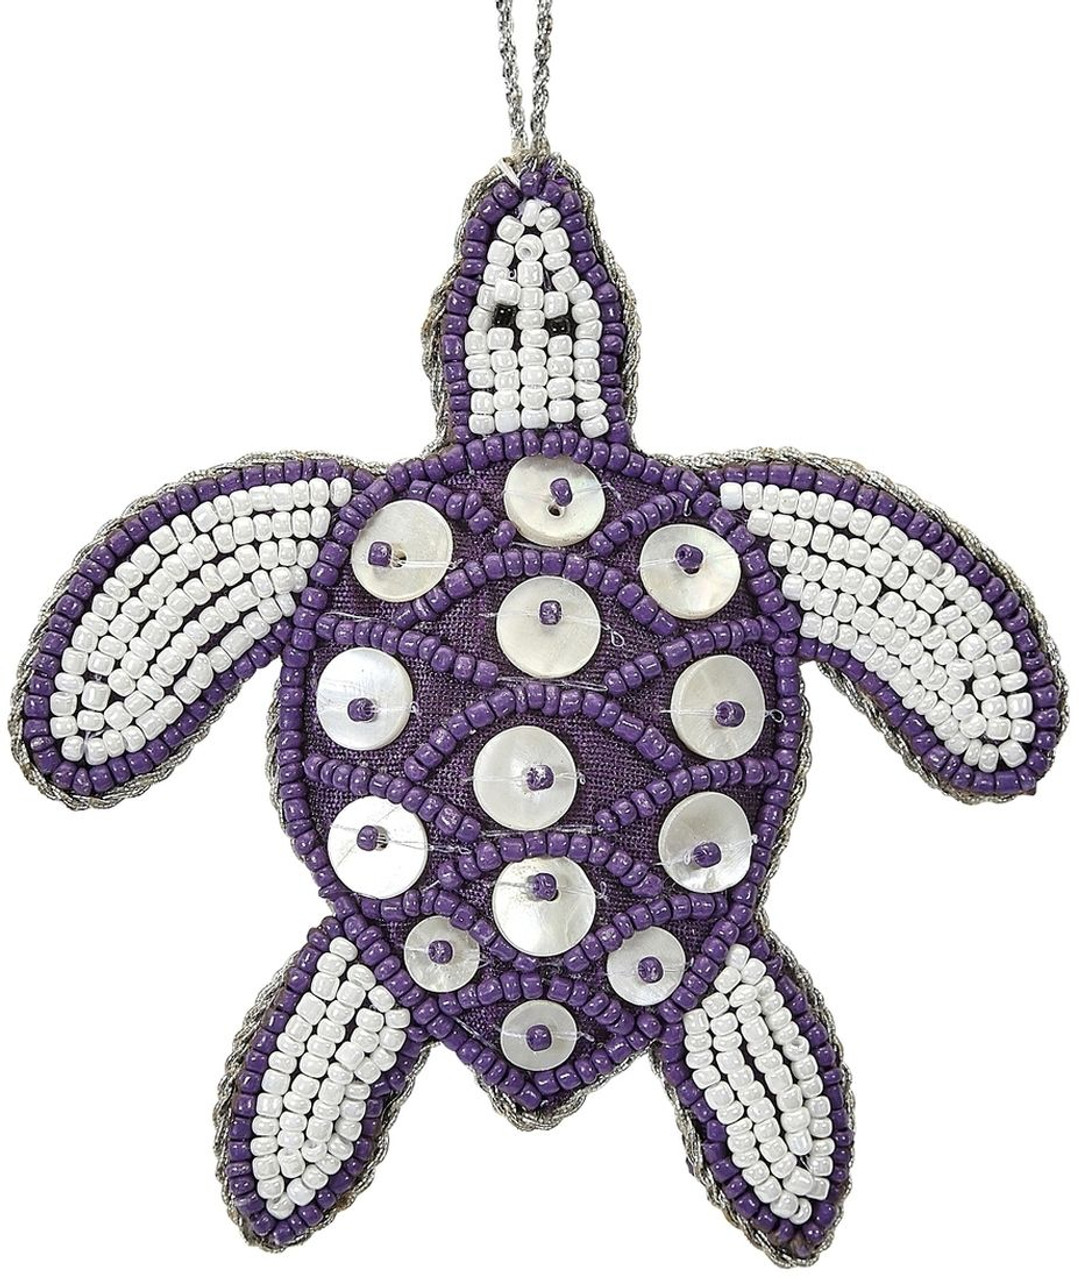 Turtle Mother of Pearl & Beads Ornament - Purple